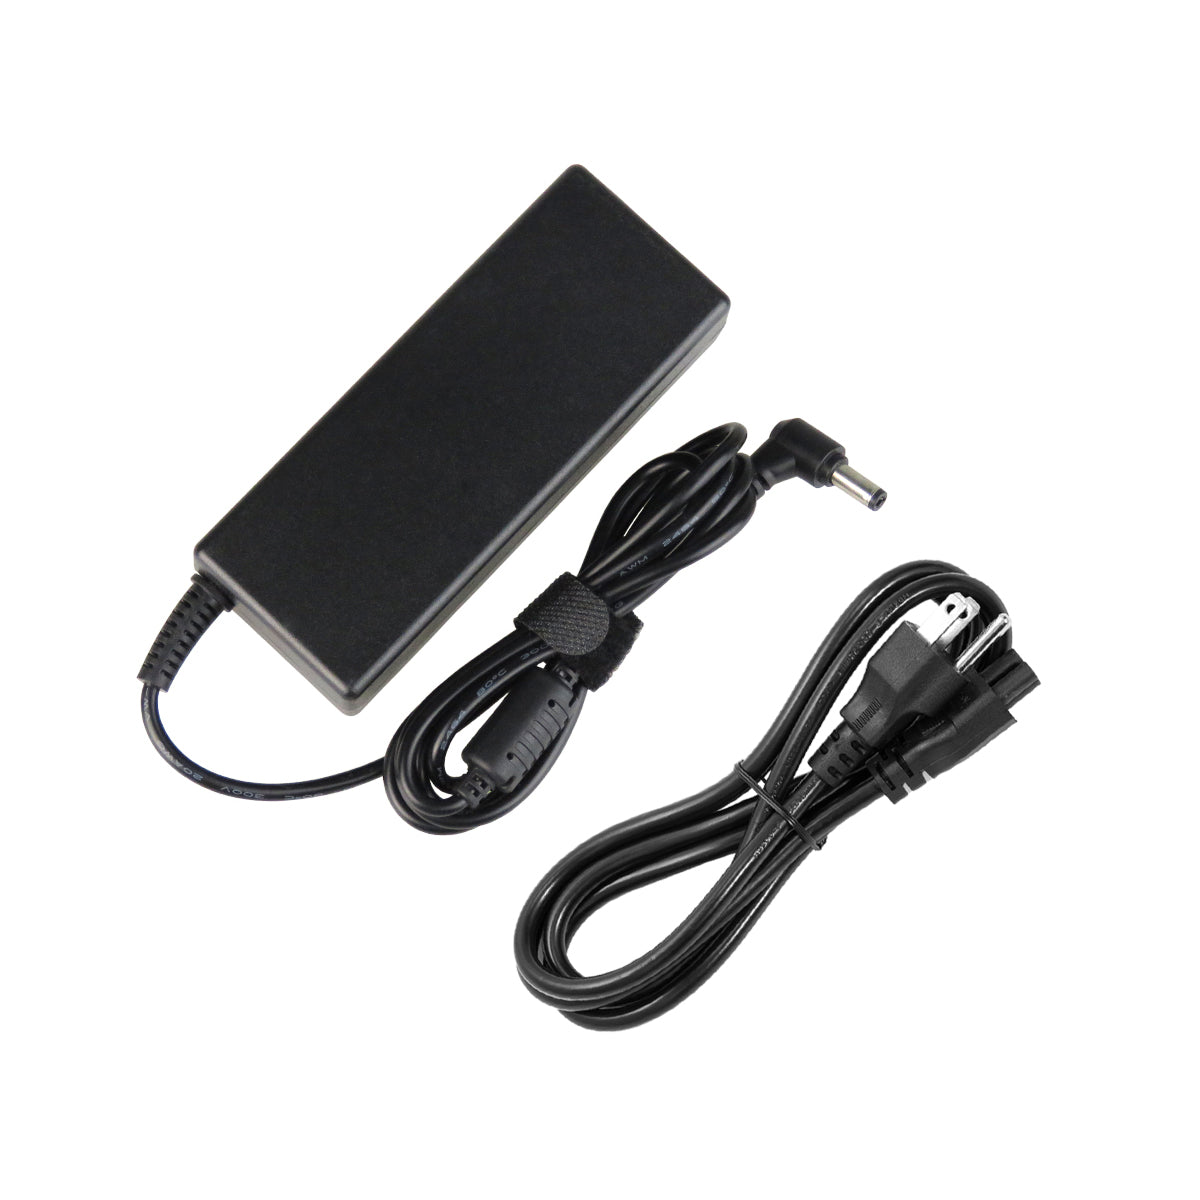 AC Adapter Charger for ASUS u81 Series Notebook.